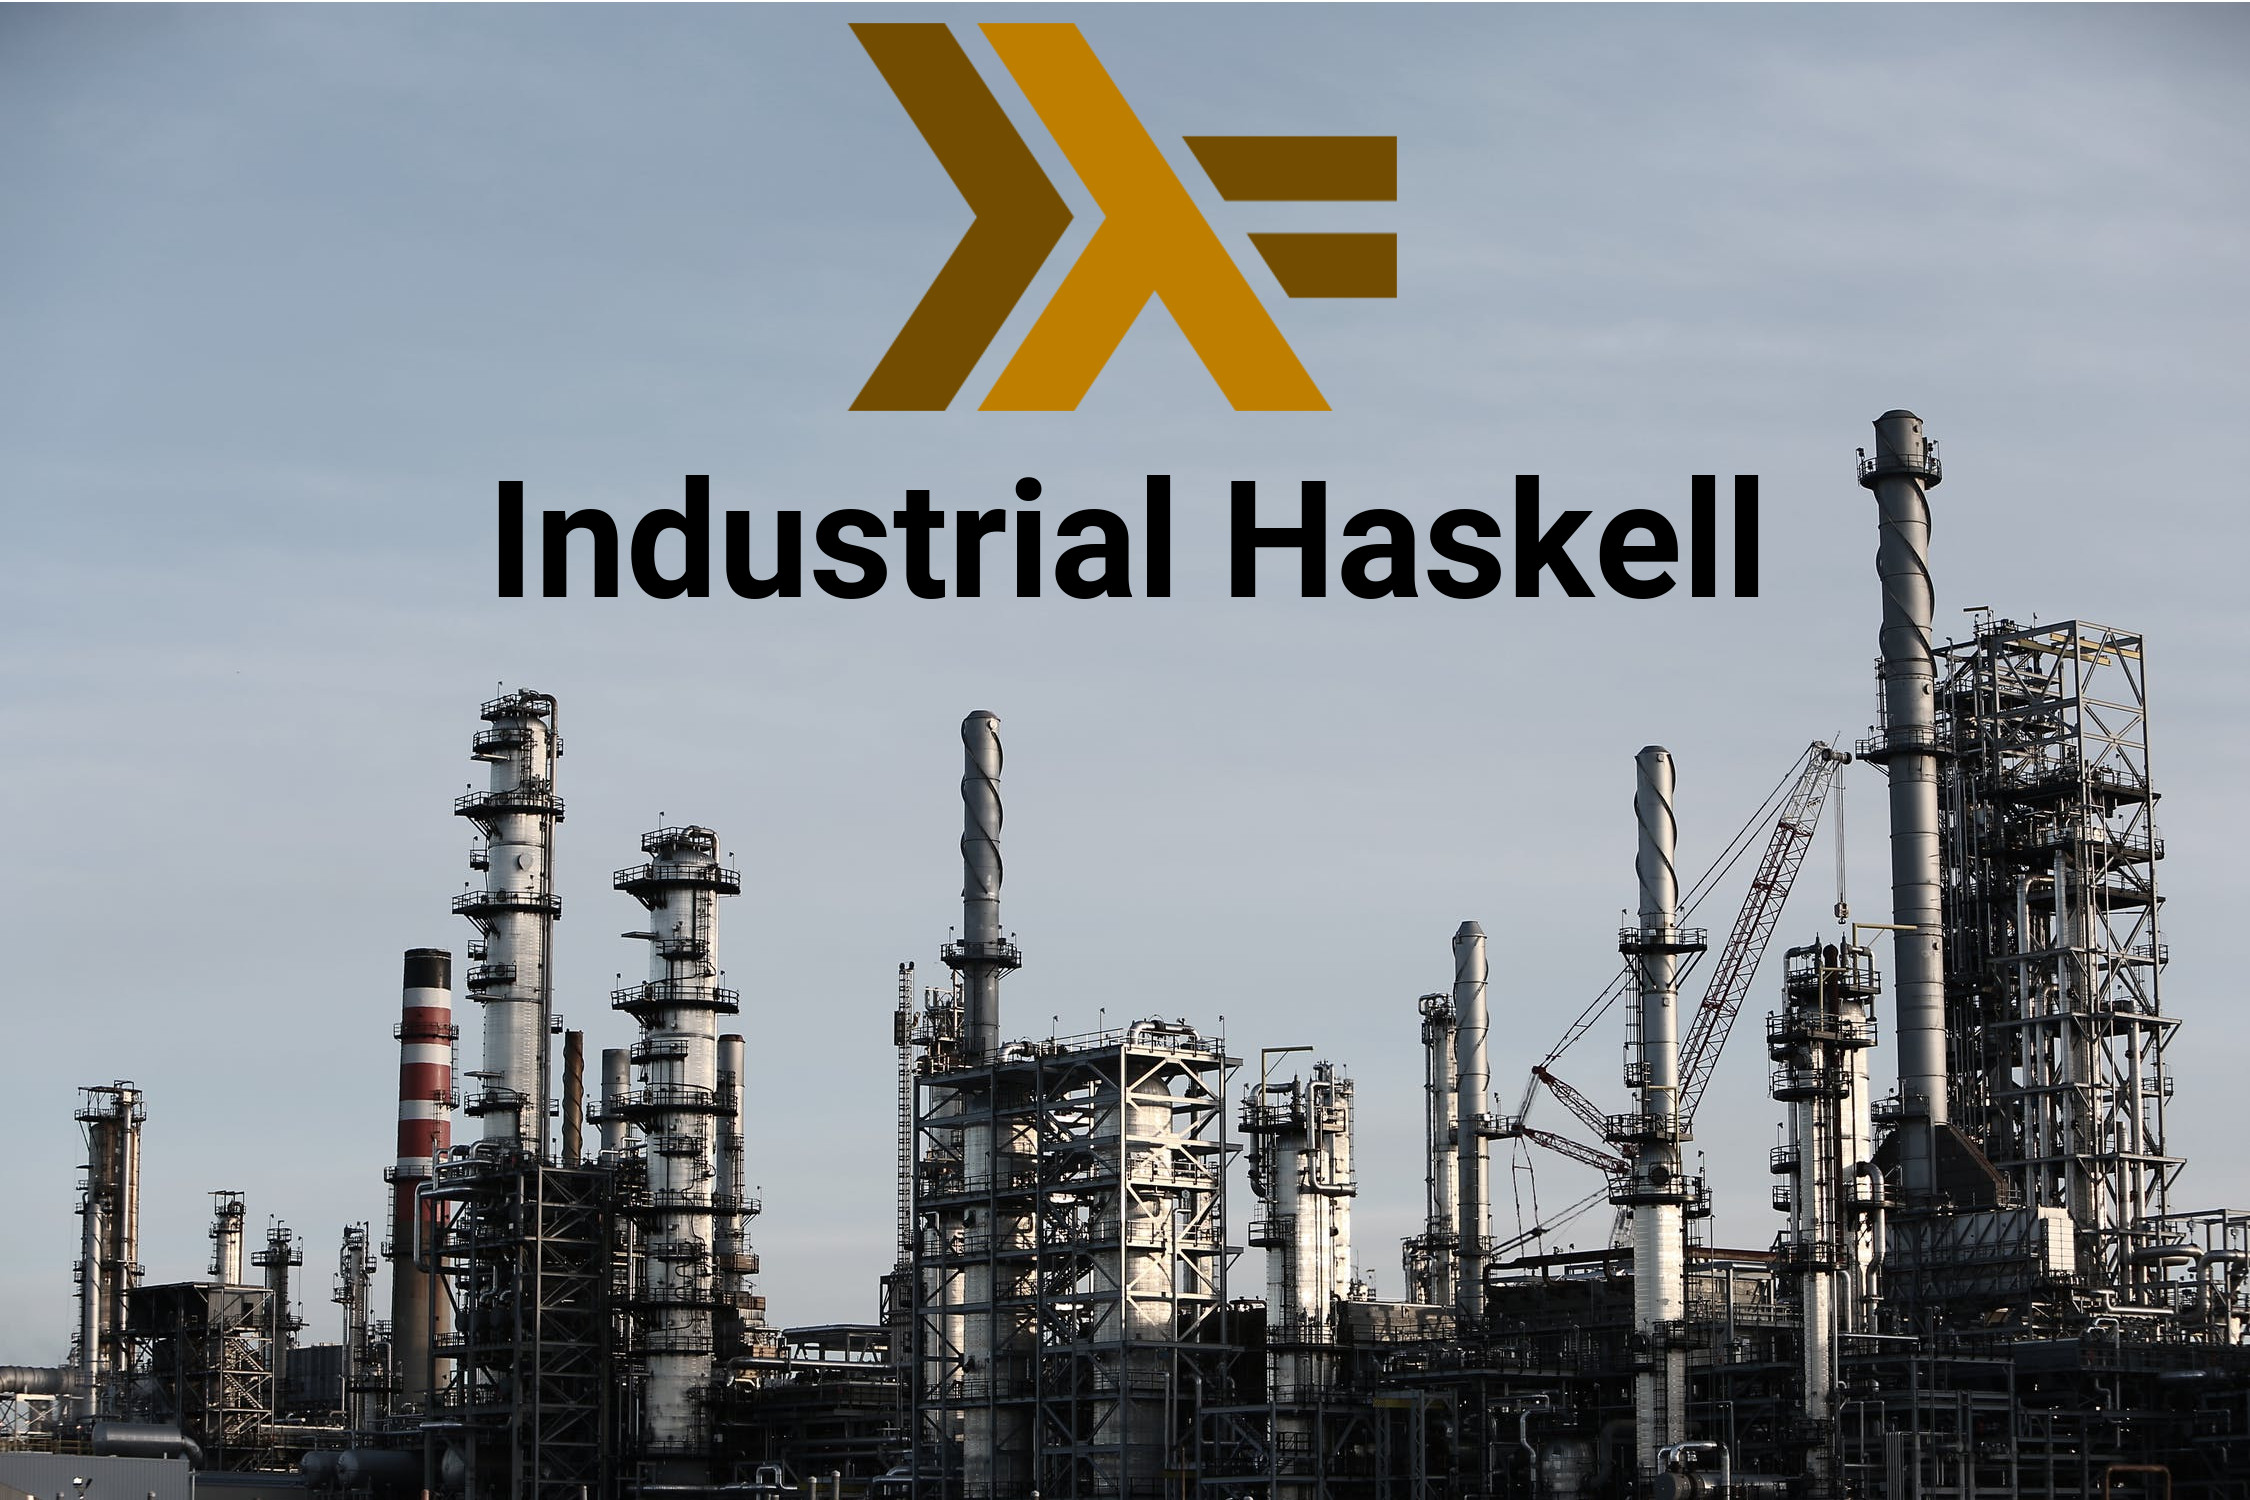 Industrial Haskell